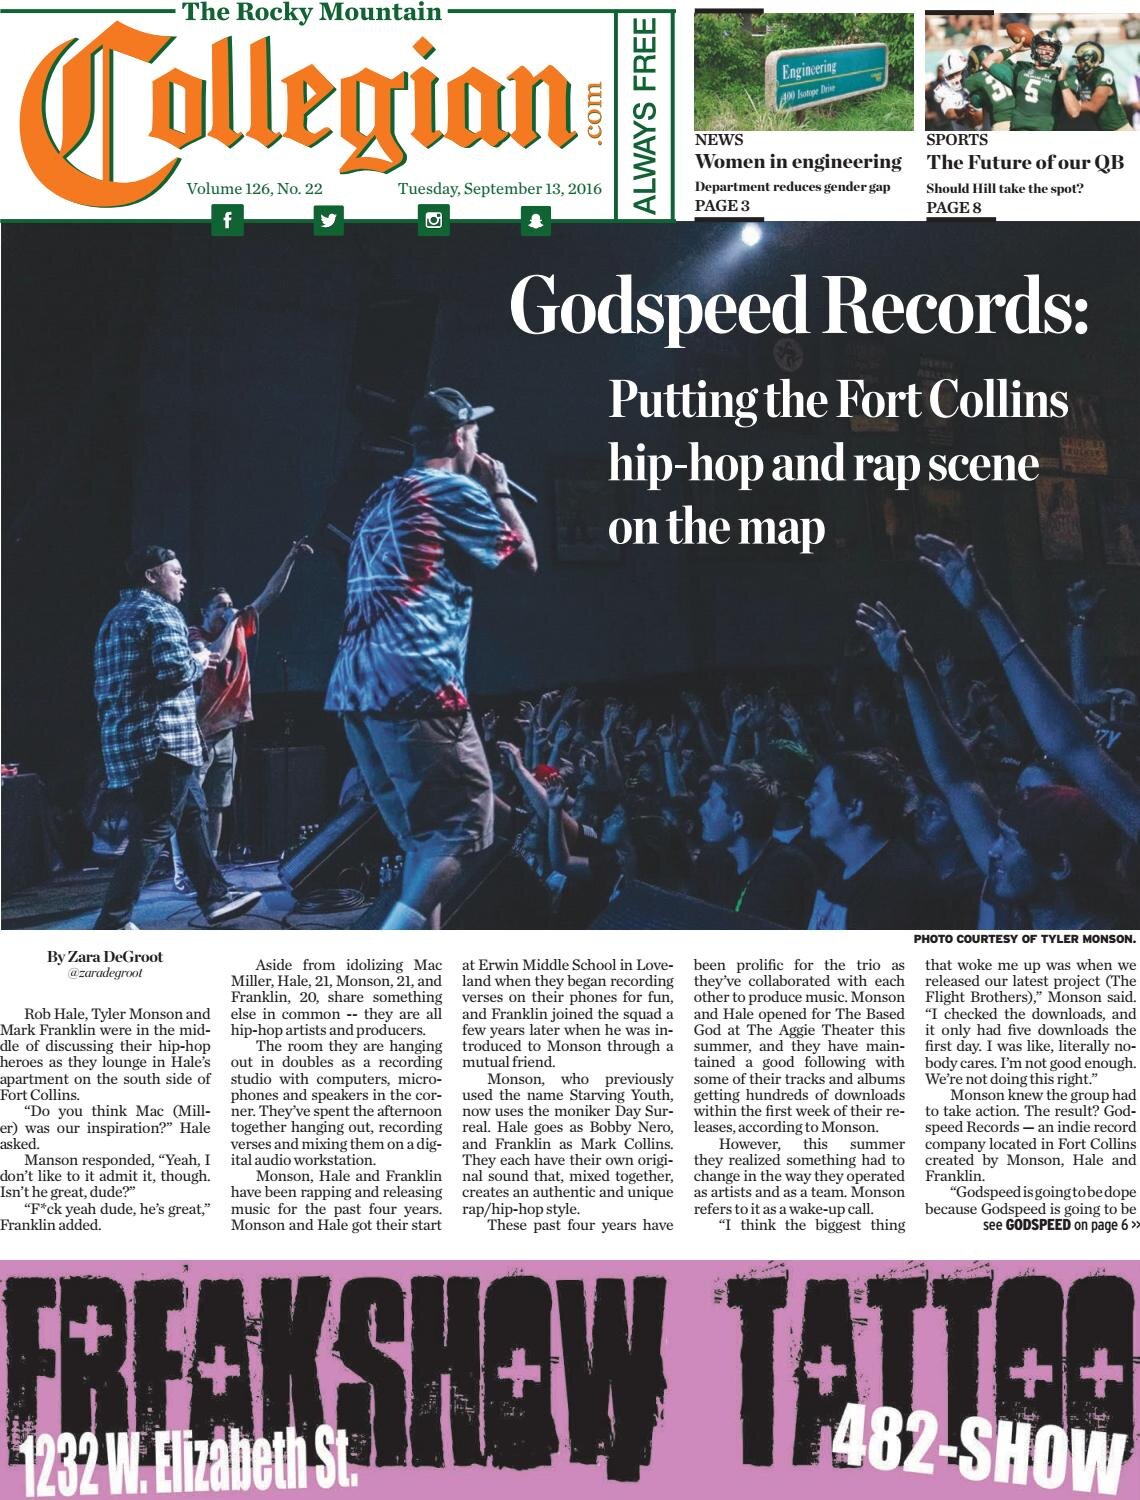 godspeed-records-putting-the-fort-collins-hip-hop-and-rap-scene-on-the-map.jpg